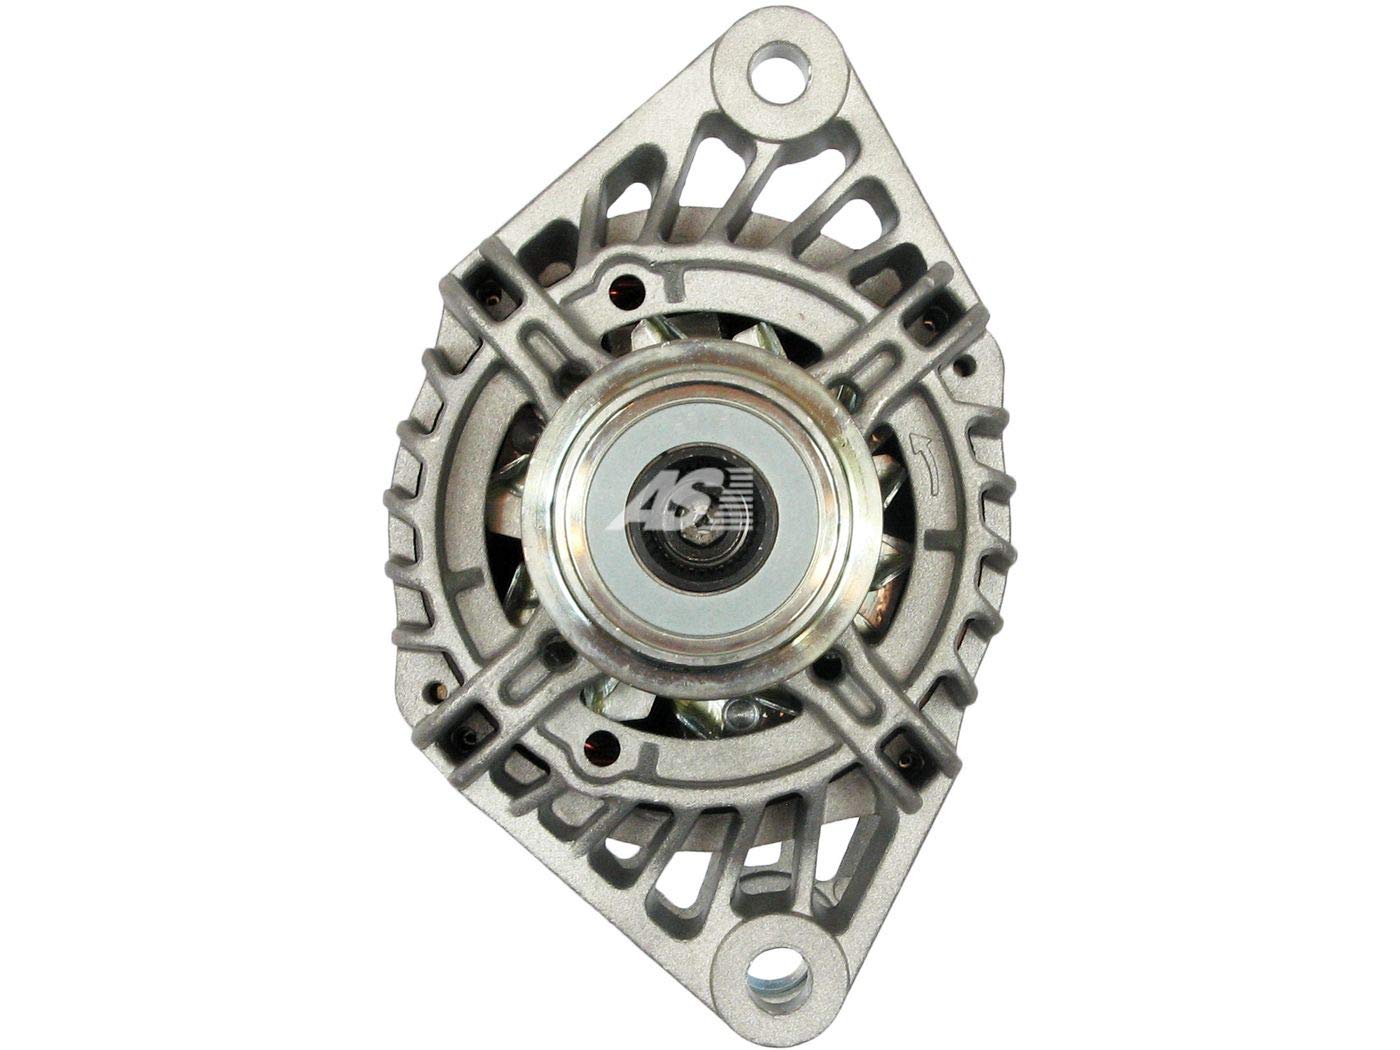 Brand new AS-PL Alternator with Free Wheel Pulley - A4043(P) von AS-PL